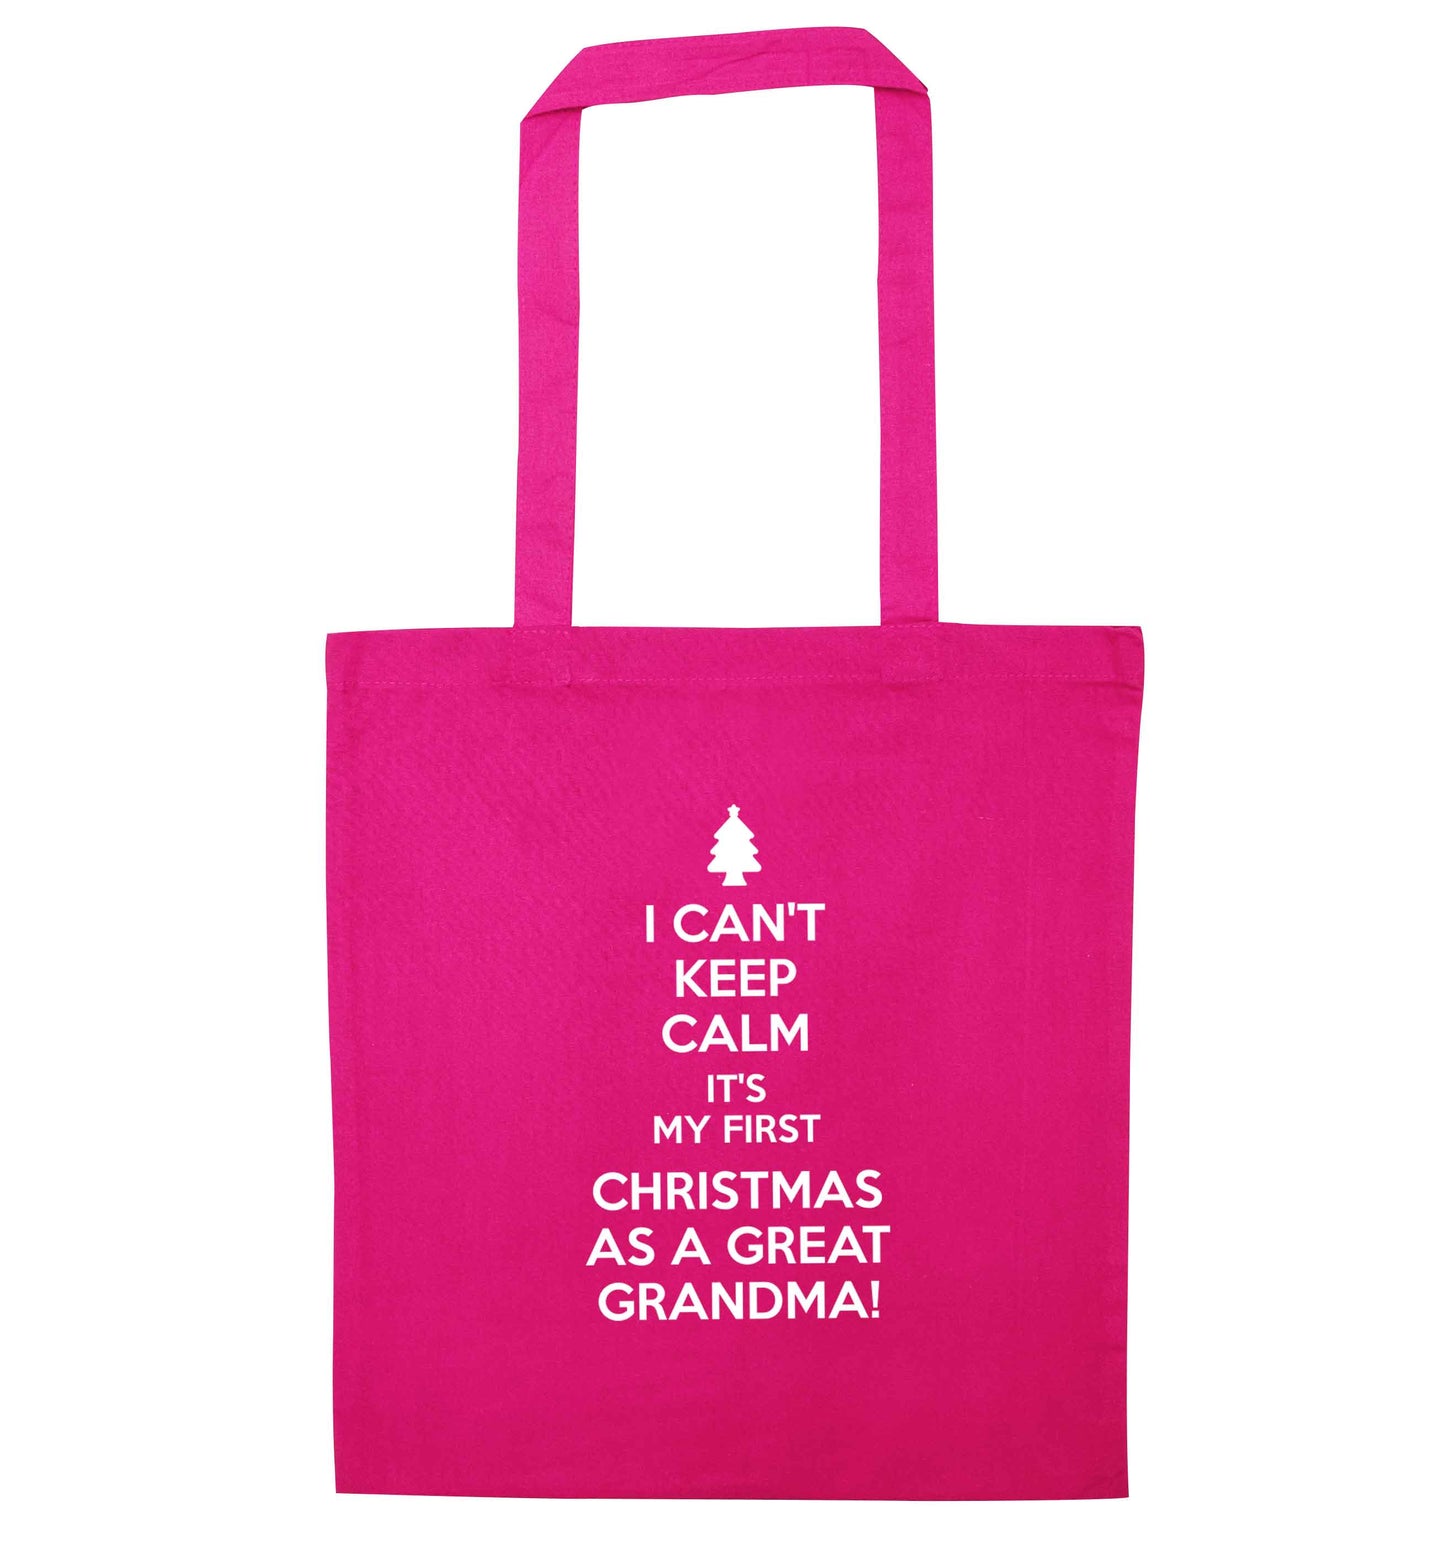 I can't keep calm it's my first Christmas as a great grandma! pink tote bag